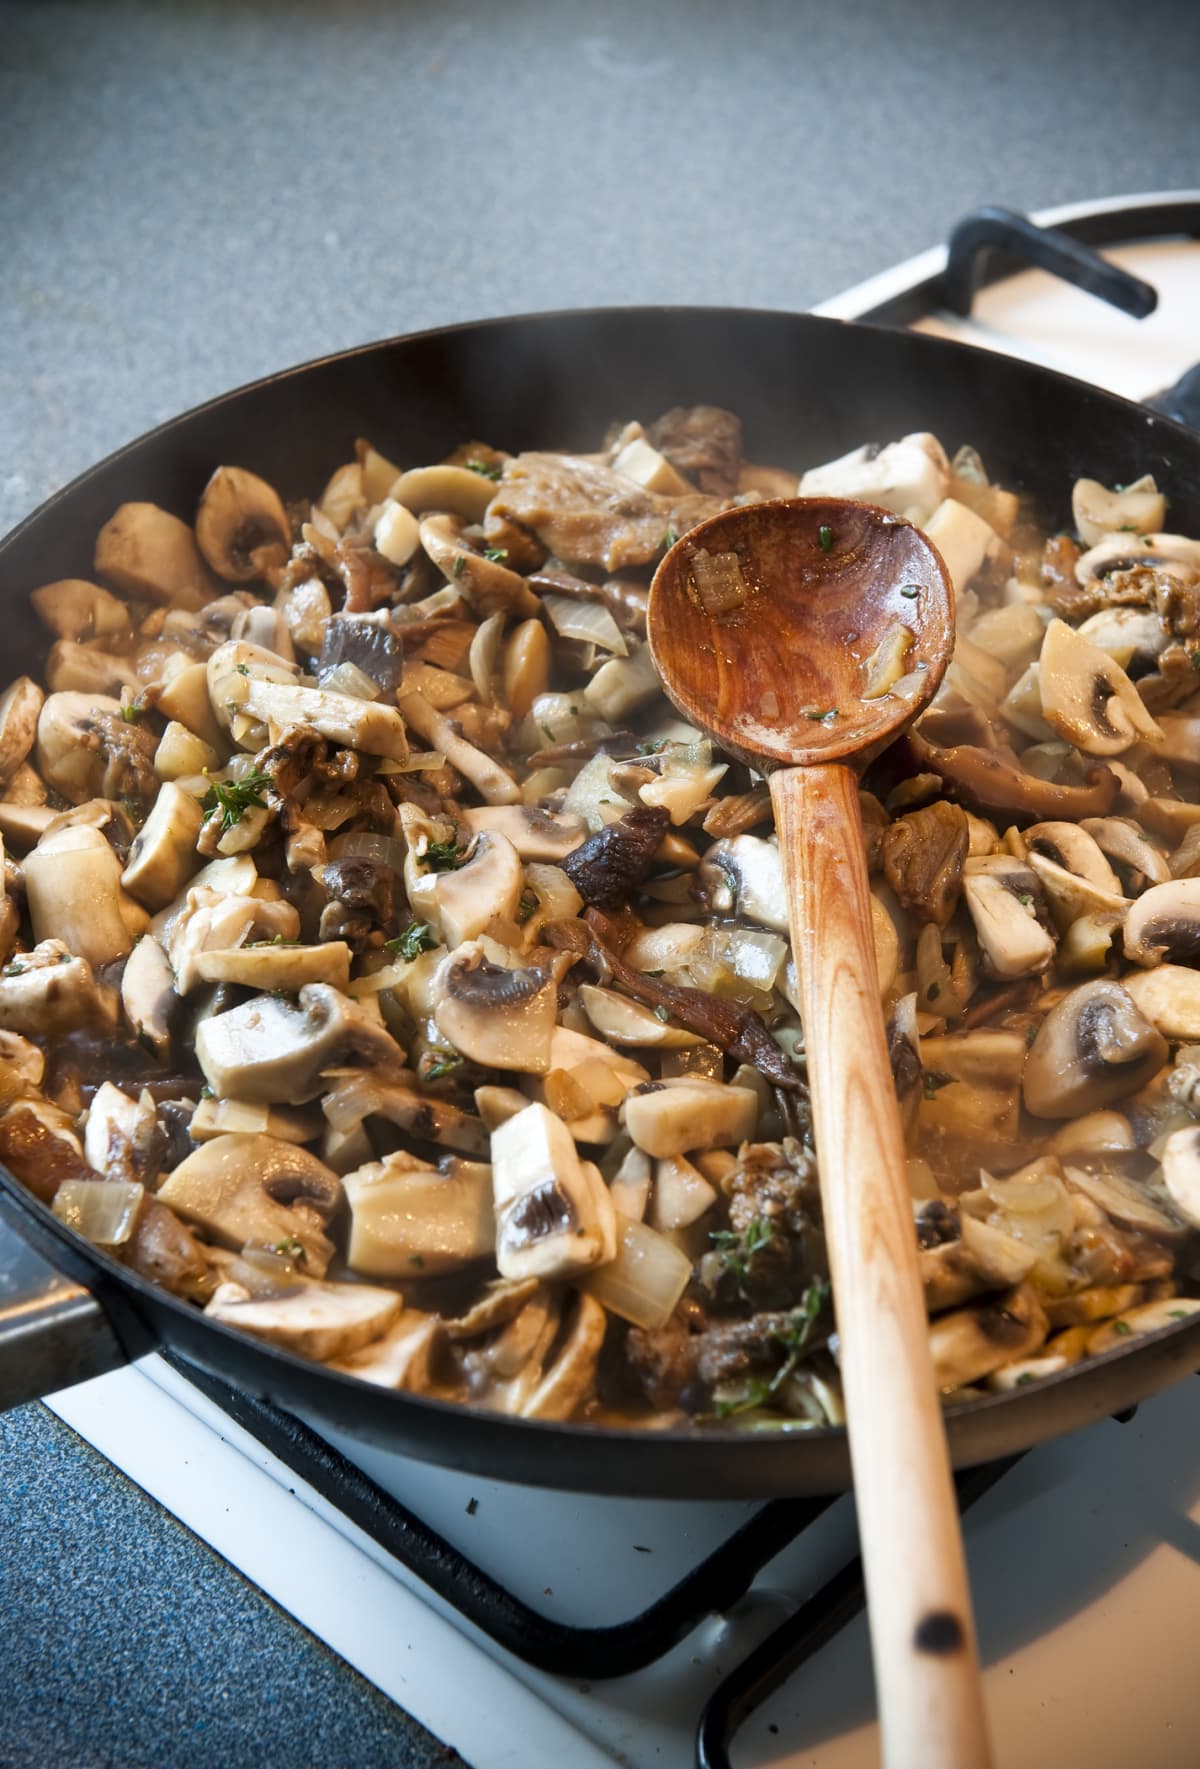 Mushrooms cooking in frying pan on gas stove